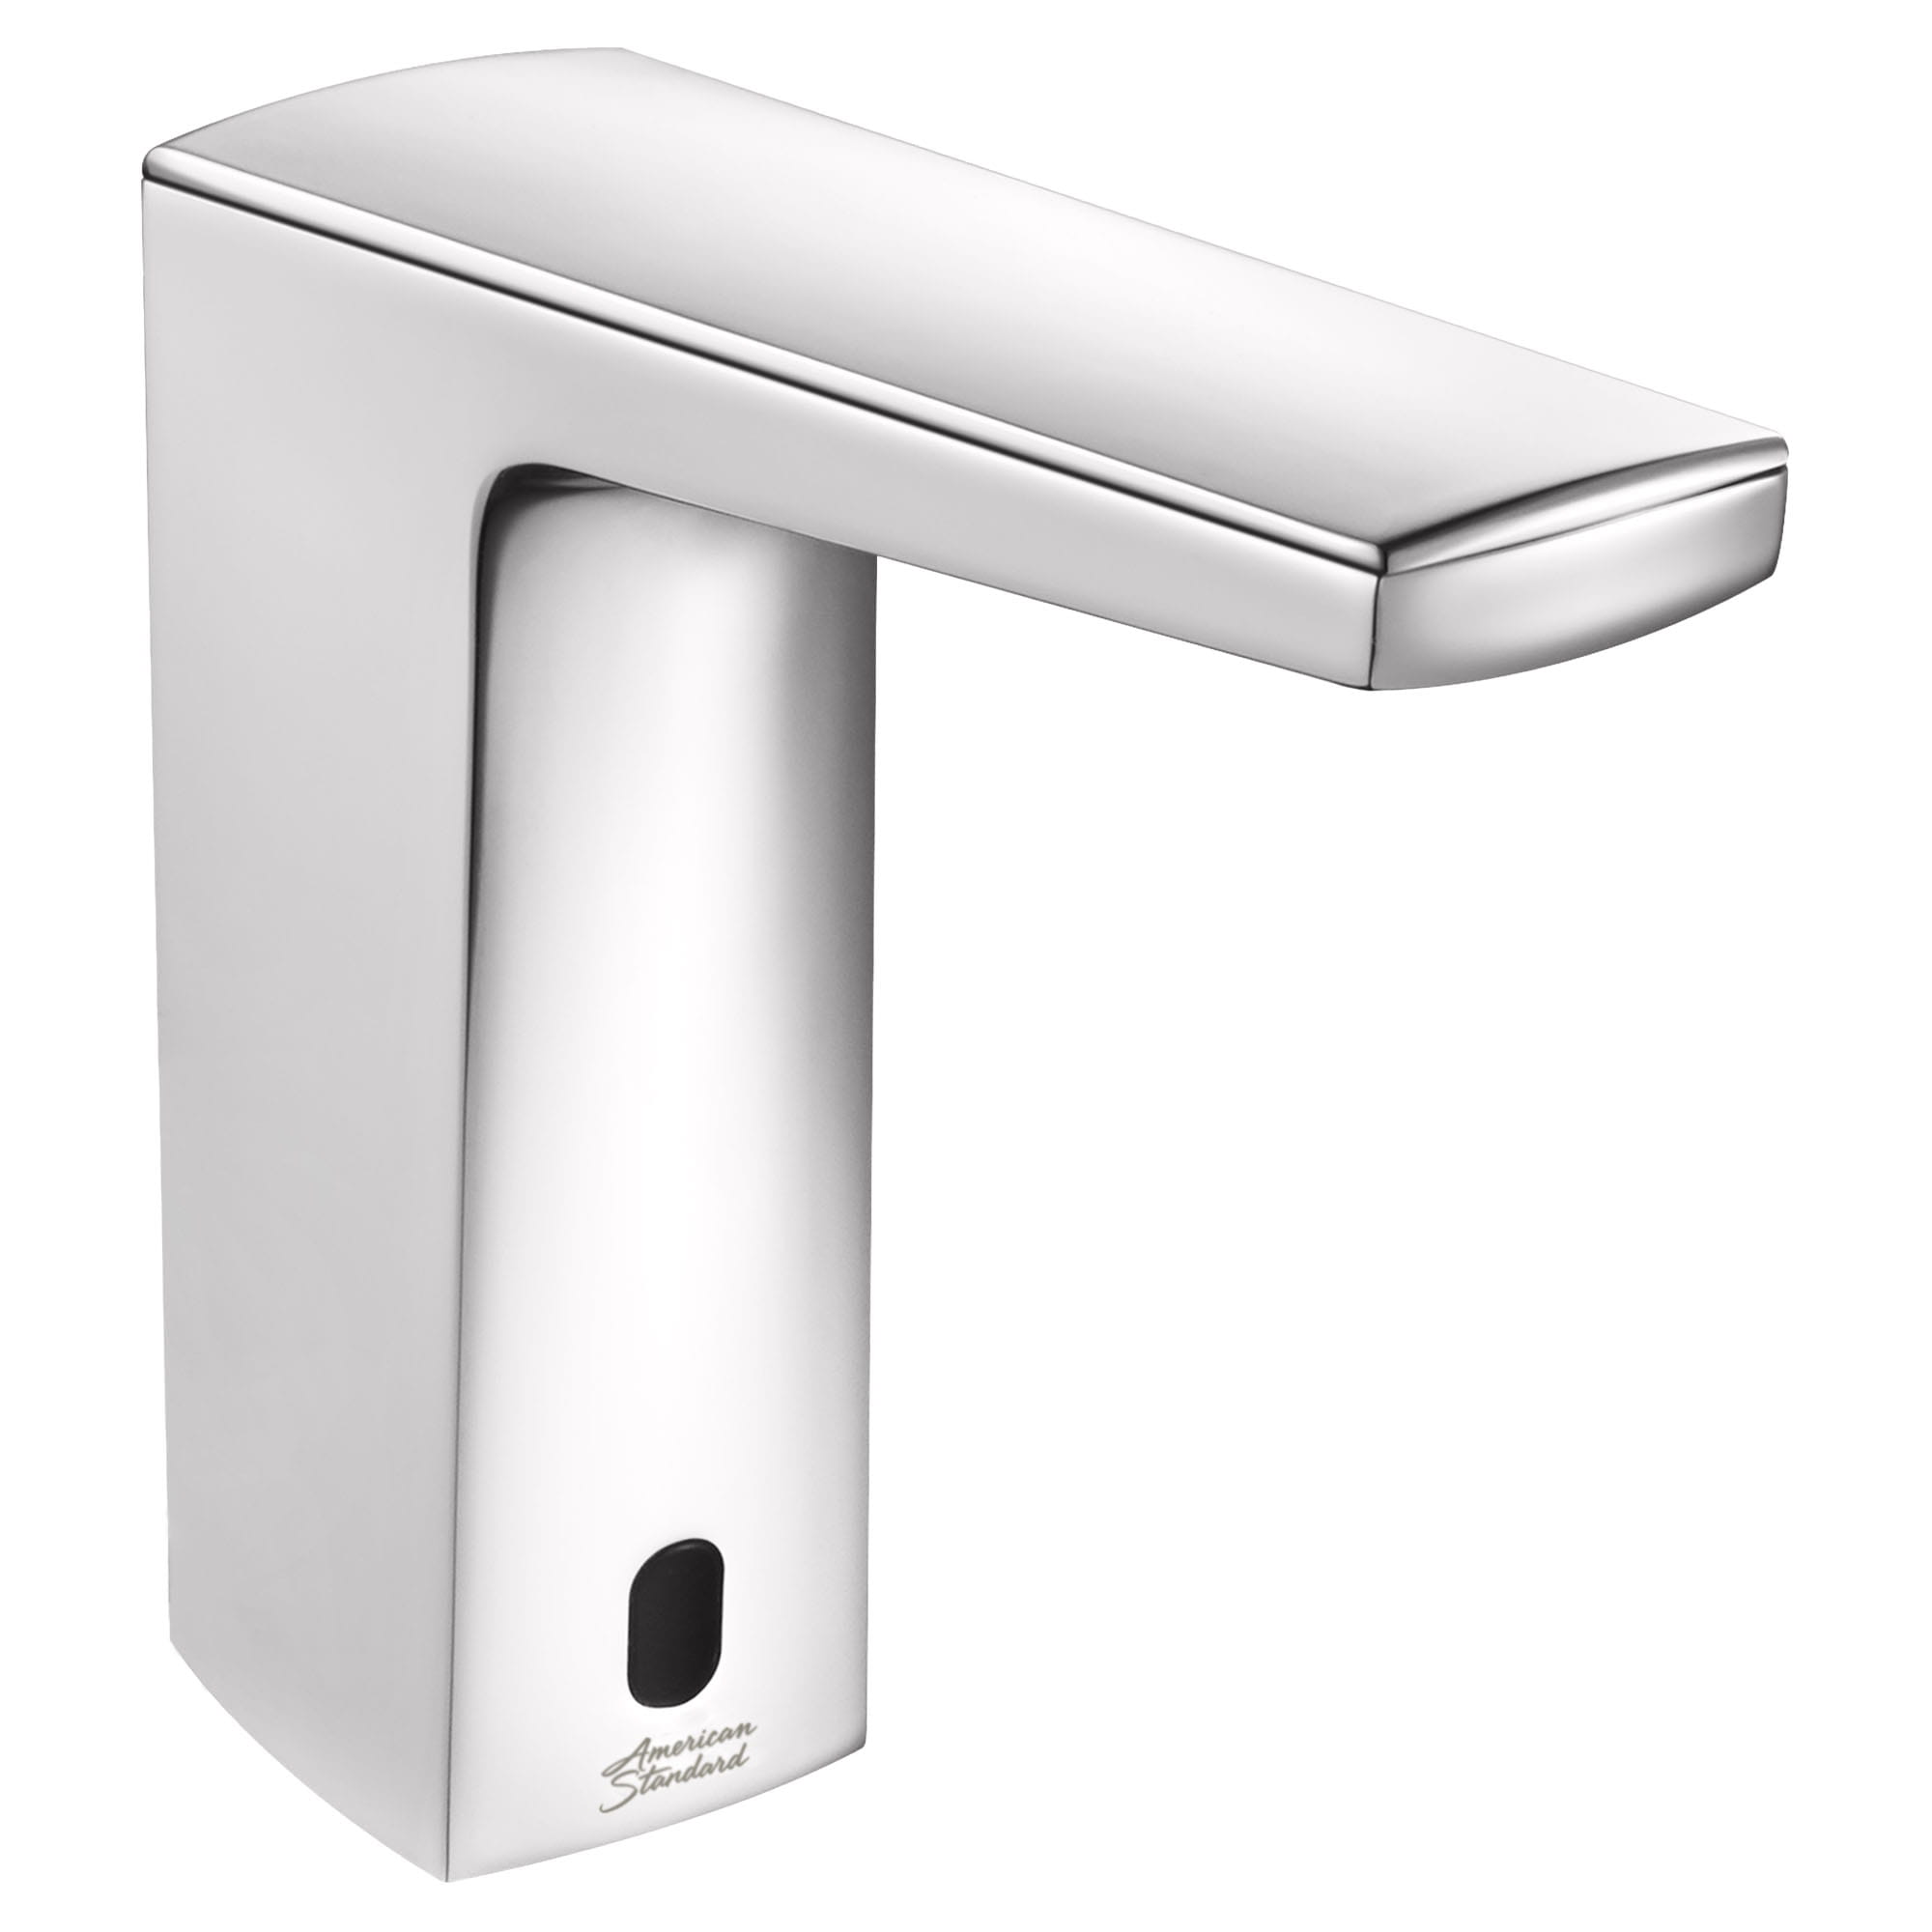 Paradigm Selectronic Touchless Faucet Battery Powered With Above Deck Mixing 15 gpm 57 Lpm CHROME